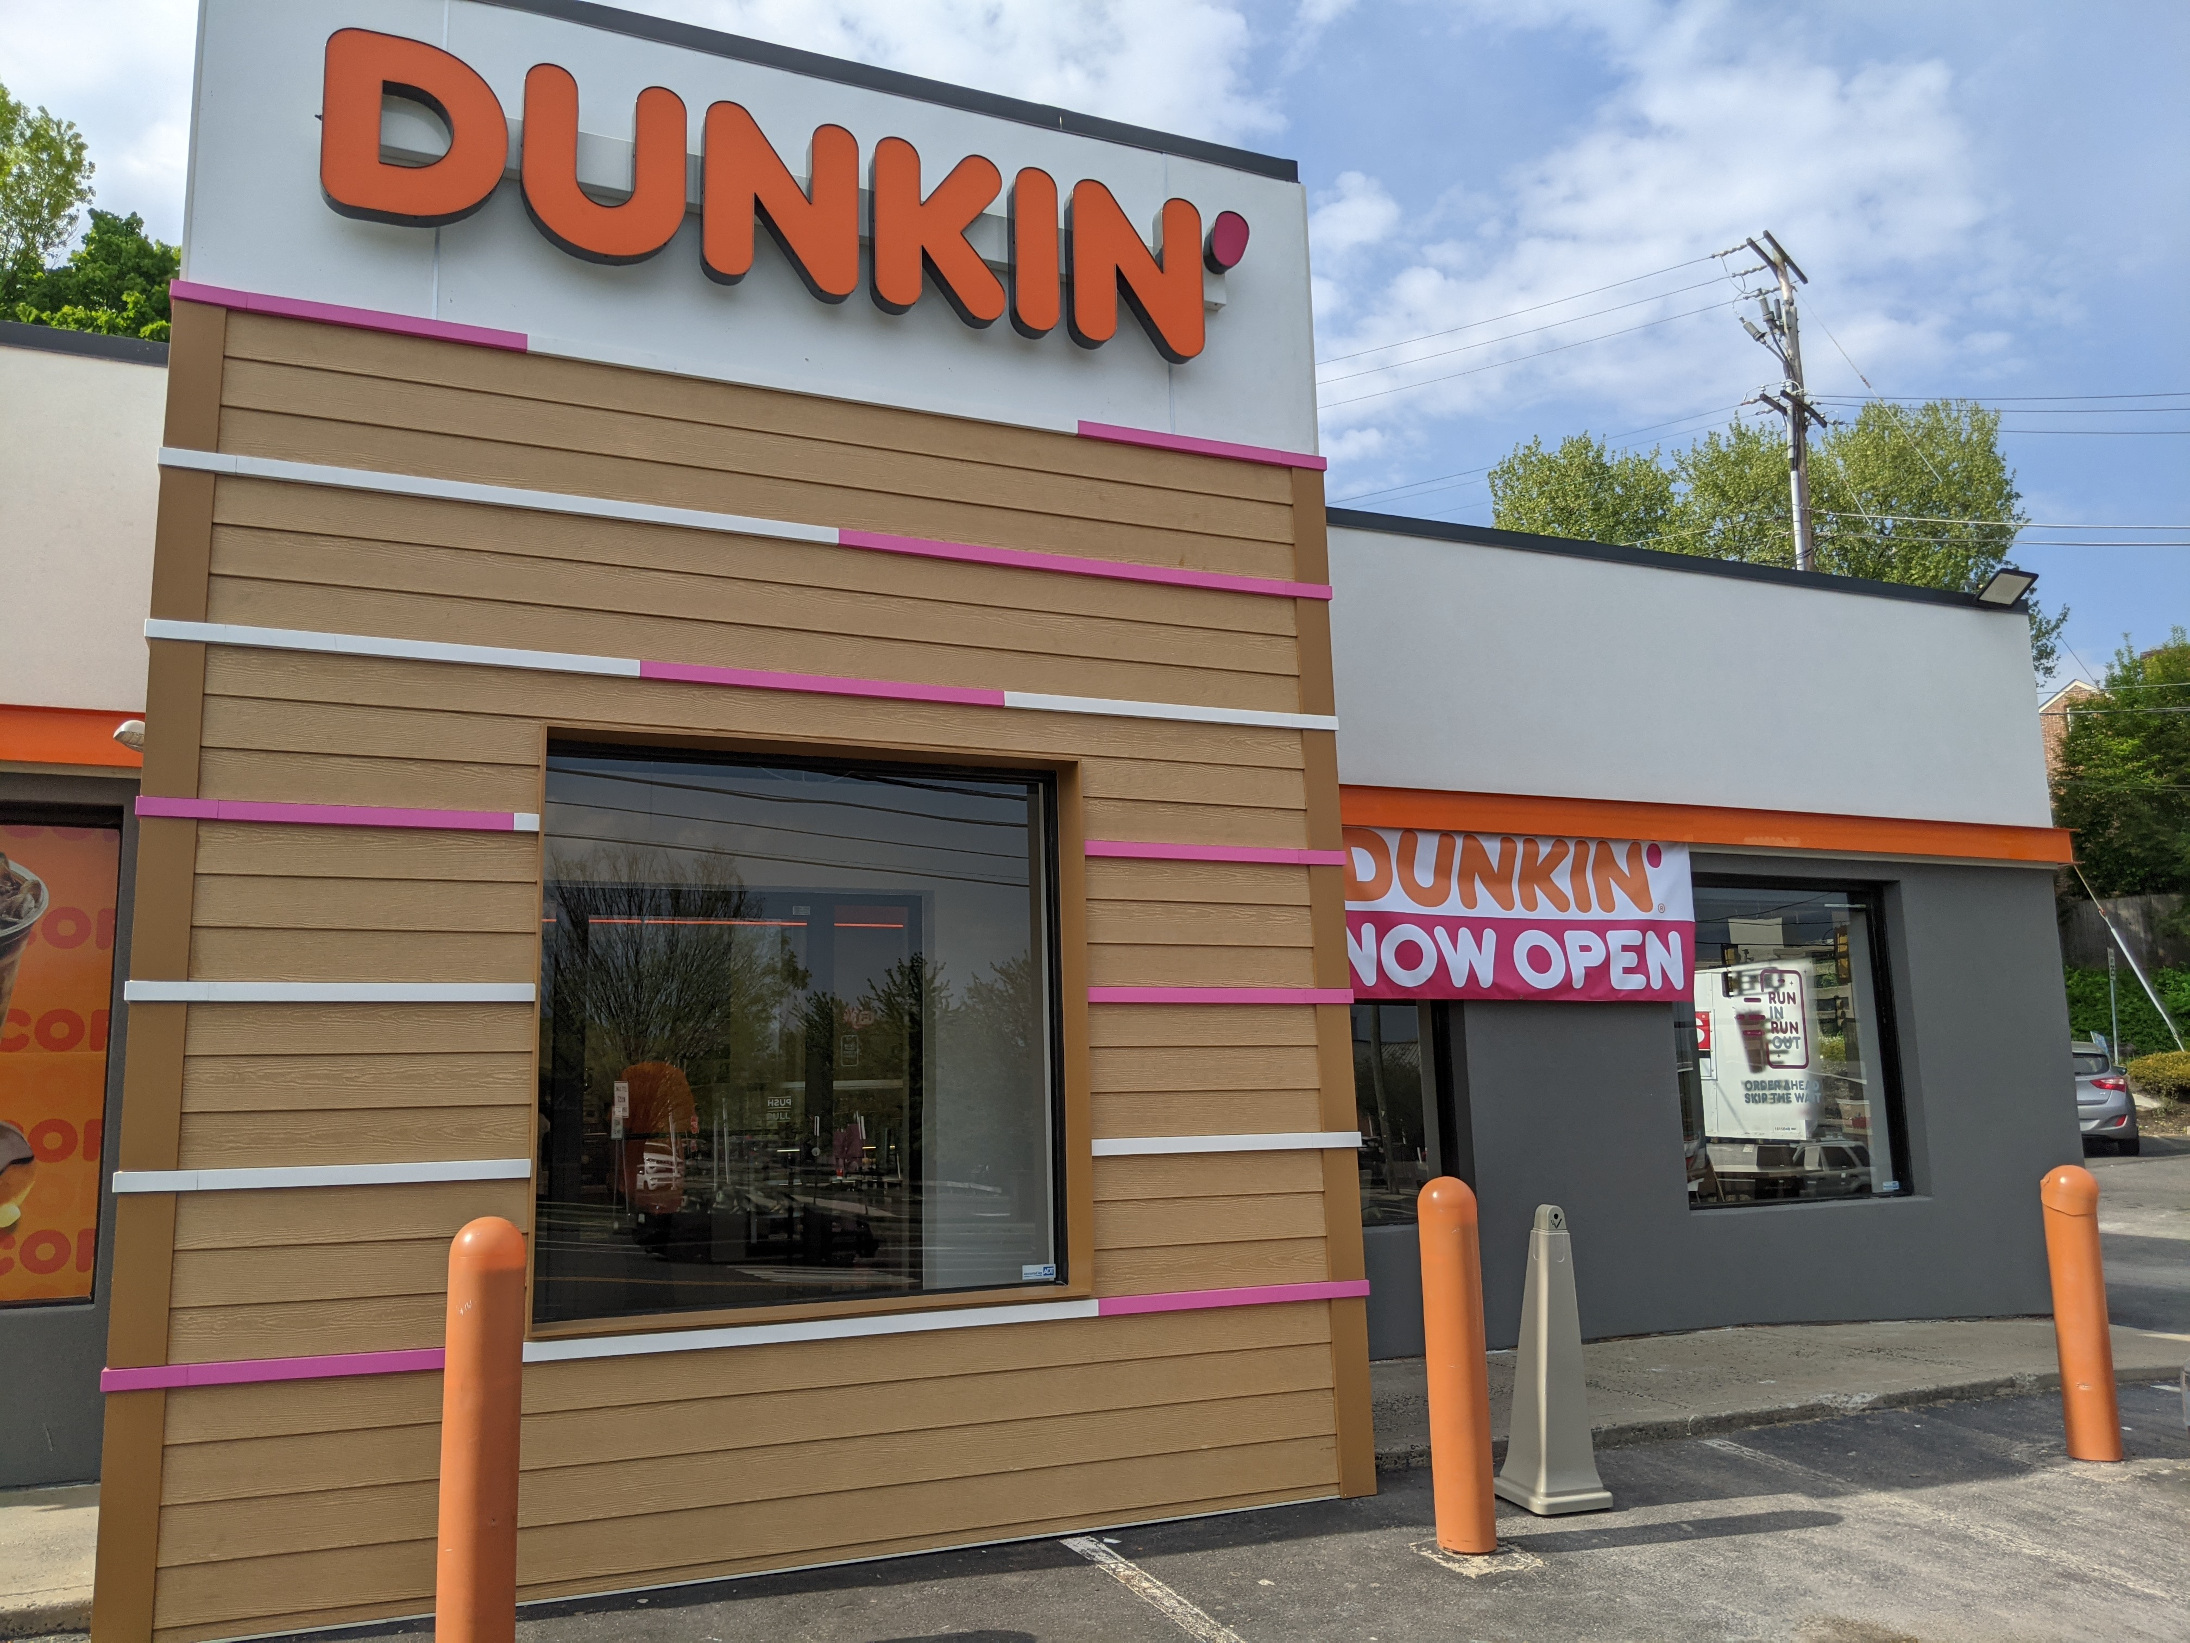 Update: Pottstown Dunkin’ Quietly Re-Opened Tuesday